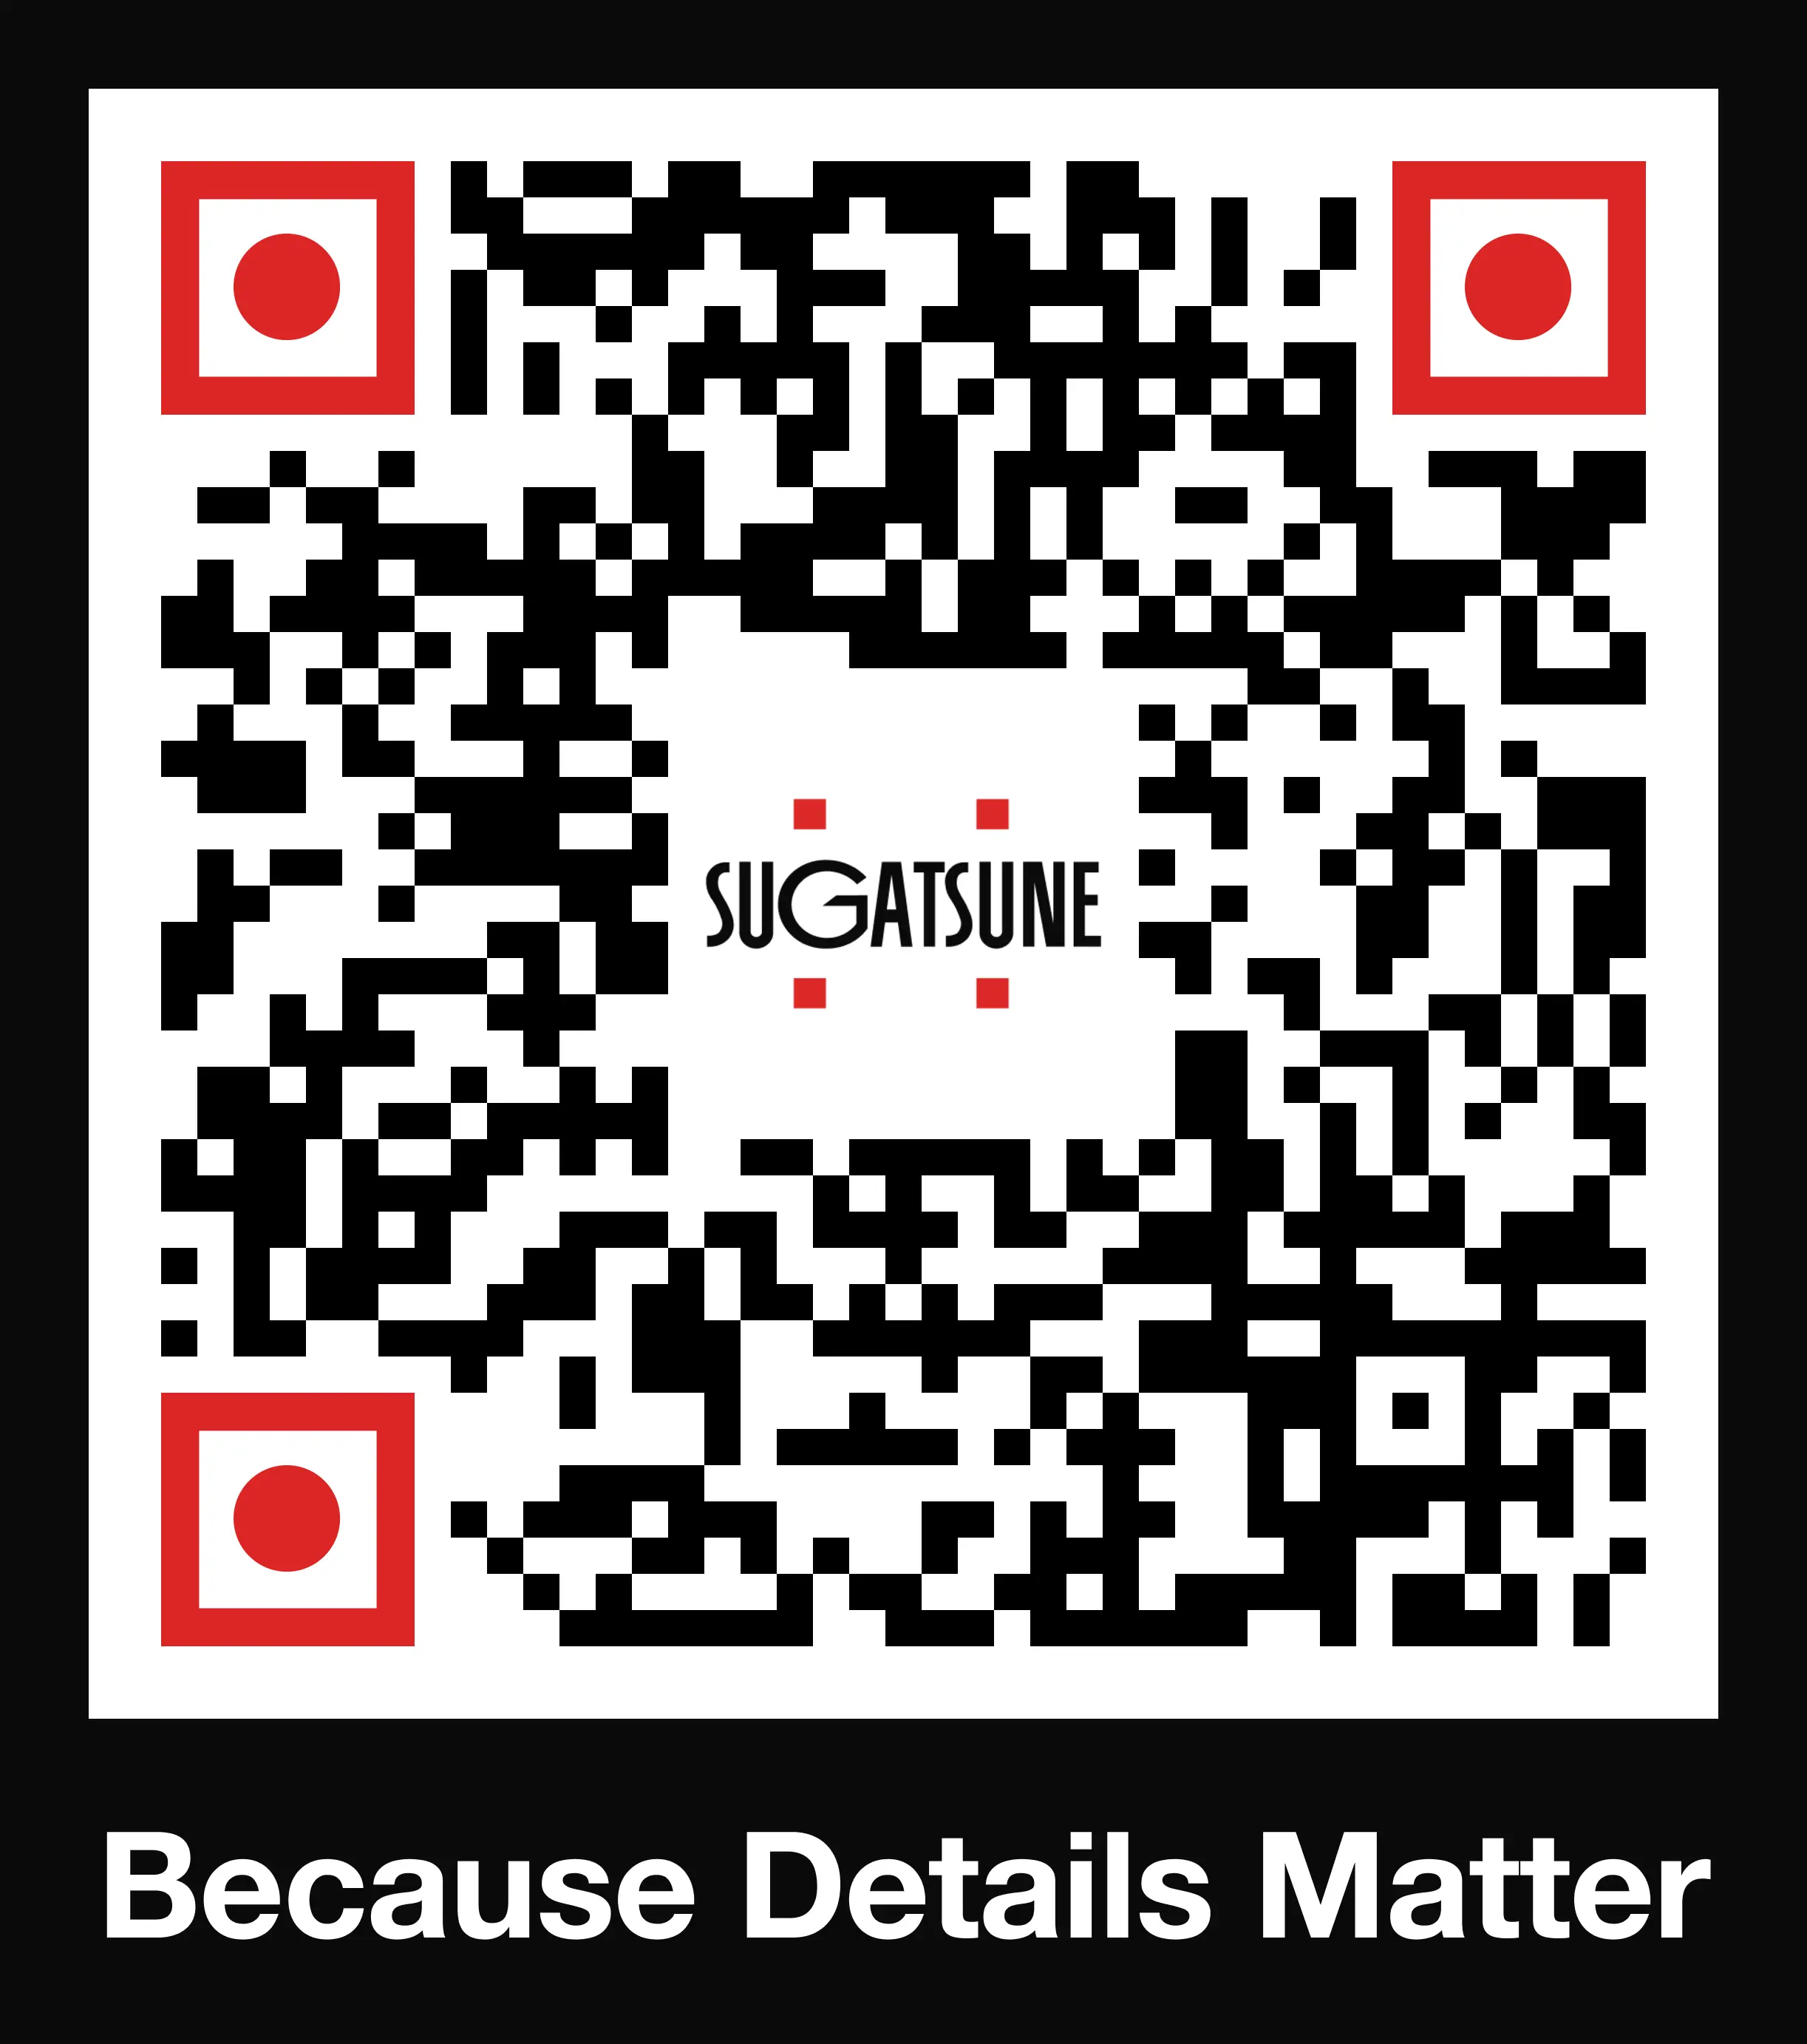 Scan to add to contact